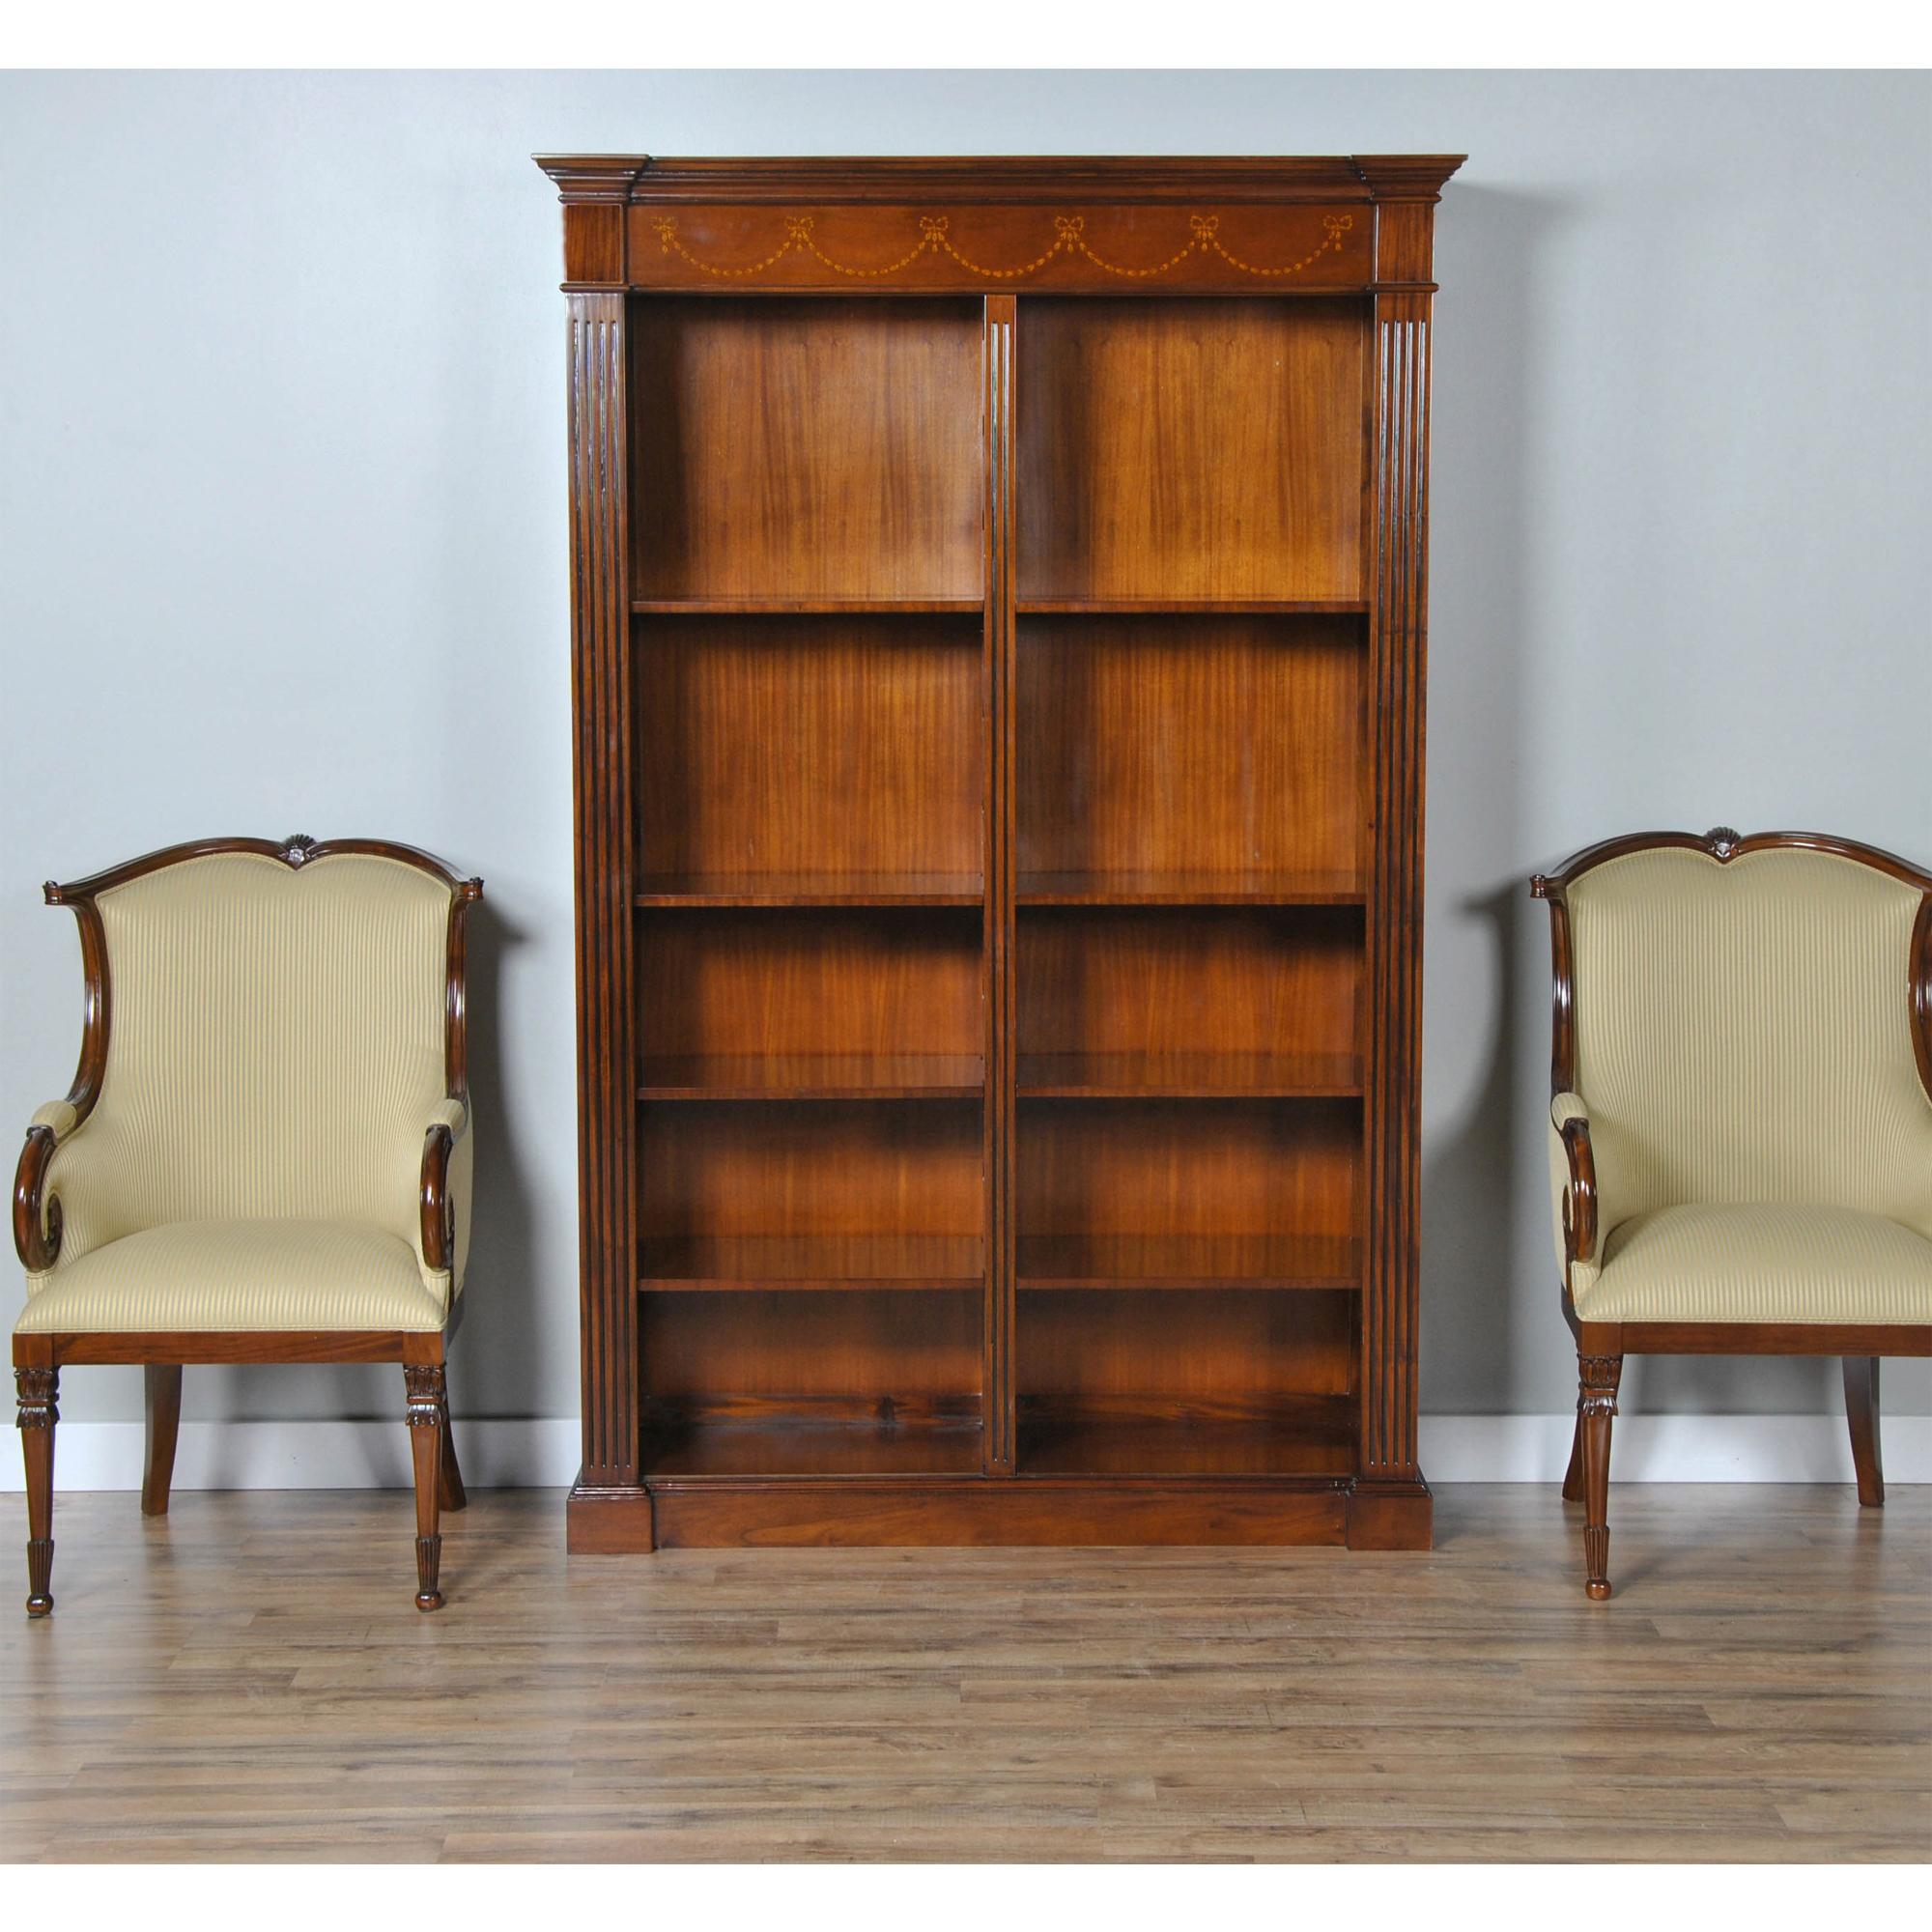 An excellent quality Large Mahogany Bookcase produced by Niagara Furniture. The top section features a moulded cornice with hand cut satinwood inlays arranged in a drape pattern. The open section being divided by a central reeded column for support